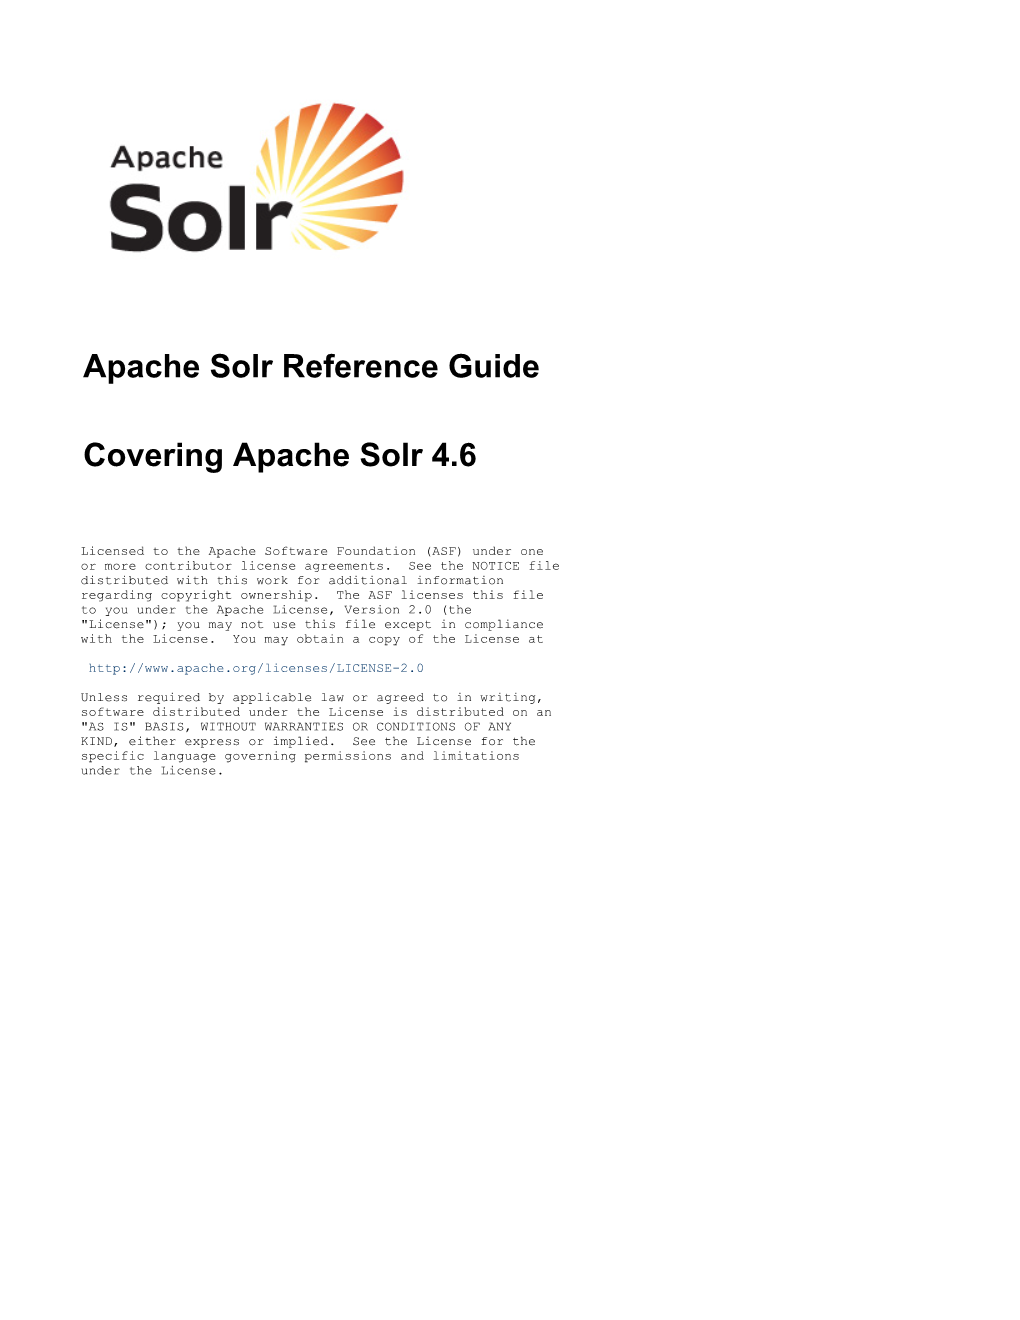 Apache Solr Reference Guide